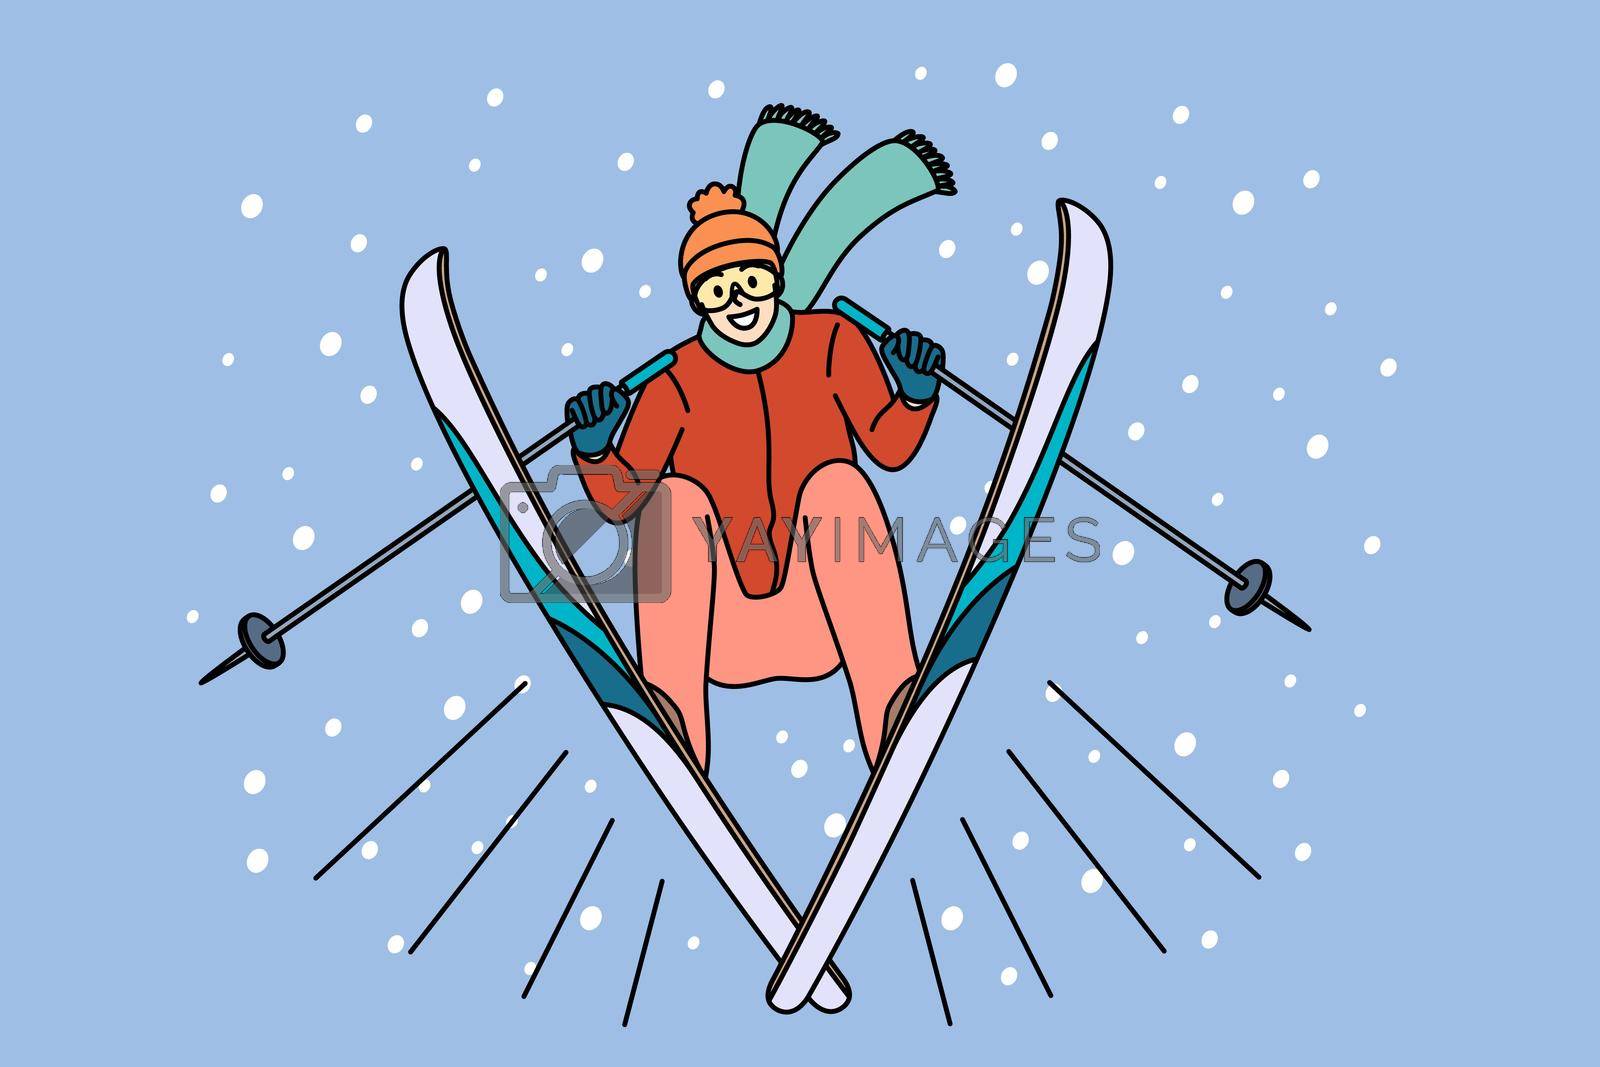 Winter activities and sport concept. Young smiling man athlete skier in sports clothes going to ride slopes on ski in winter having fun vector illustration